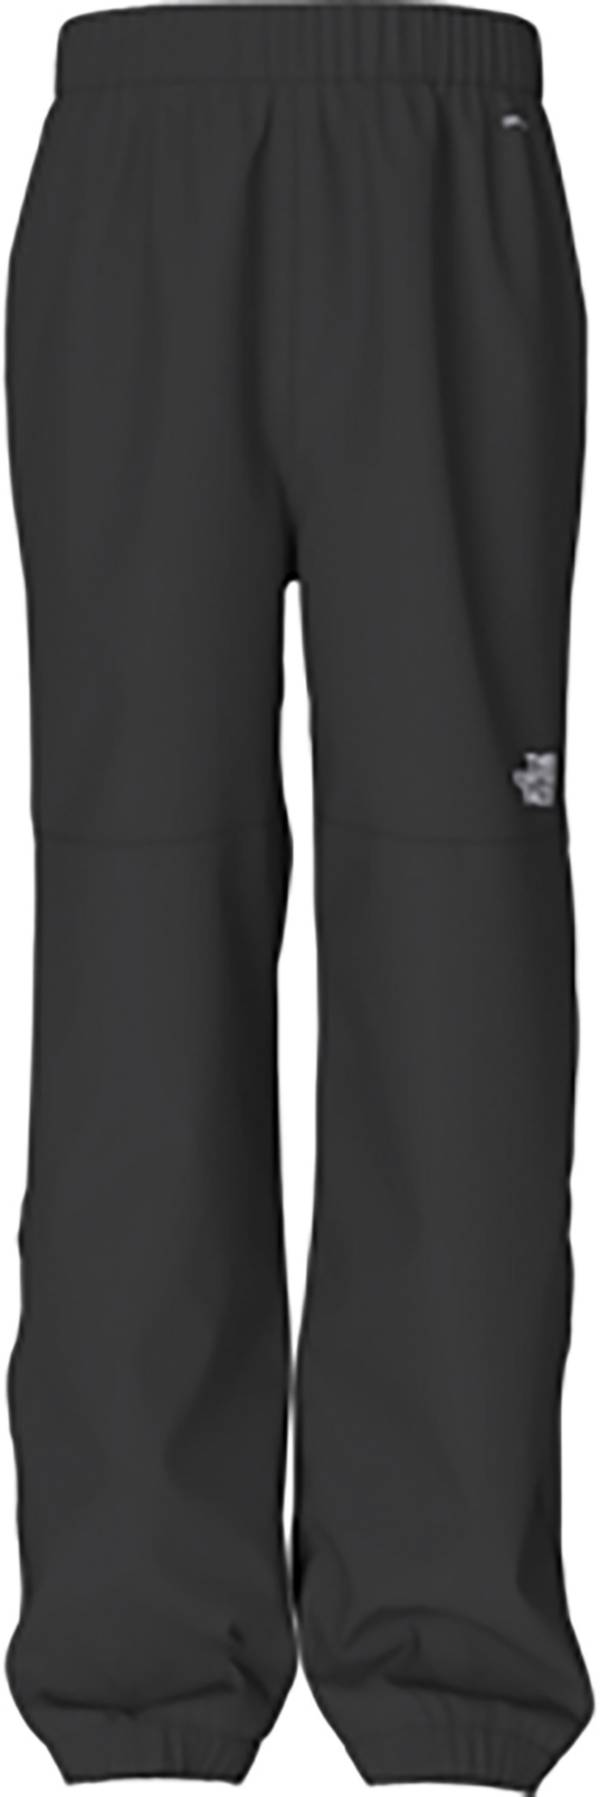 The North Face Youth Antora Rain Pants product image